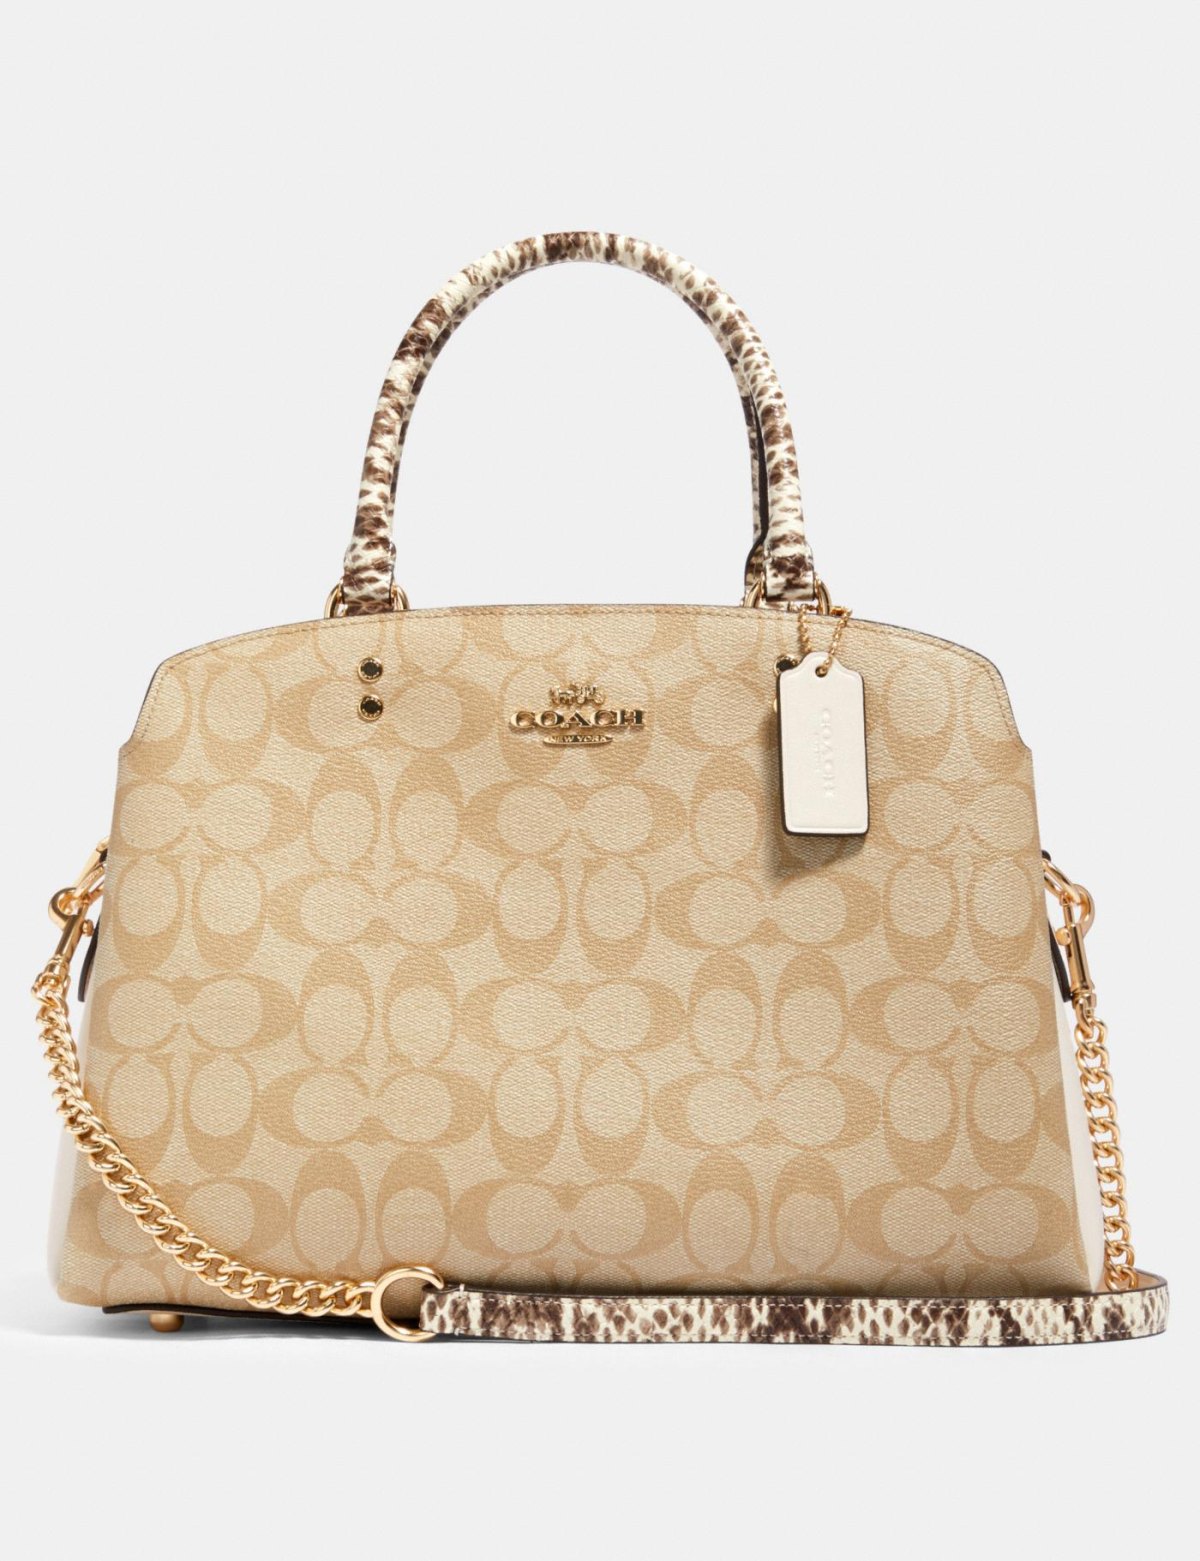 Get these 8 popular Coach bags on sale for up to 70% off